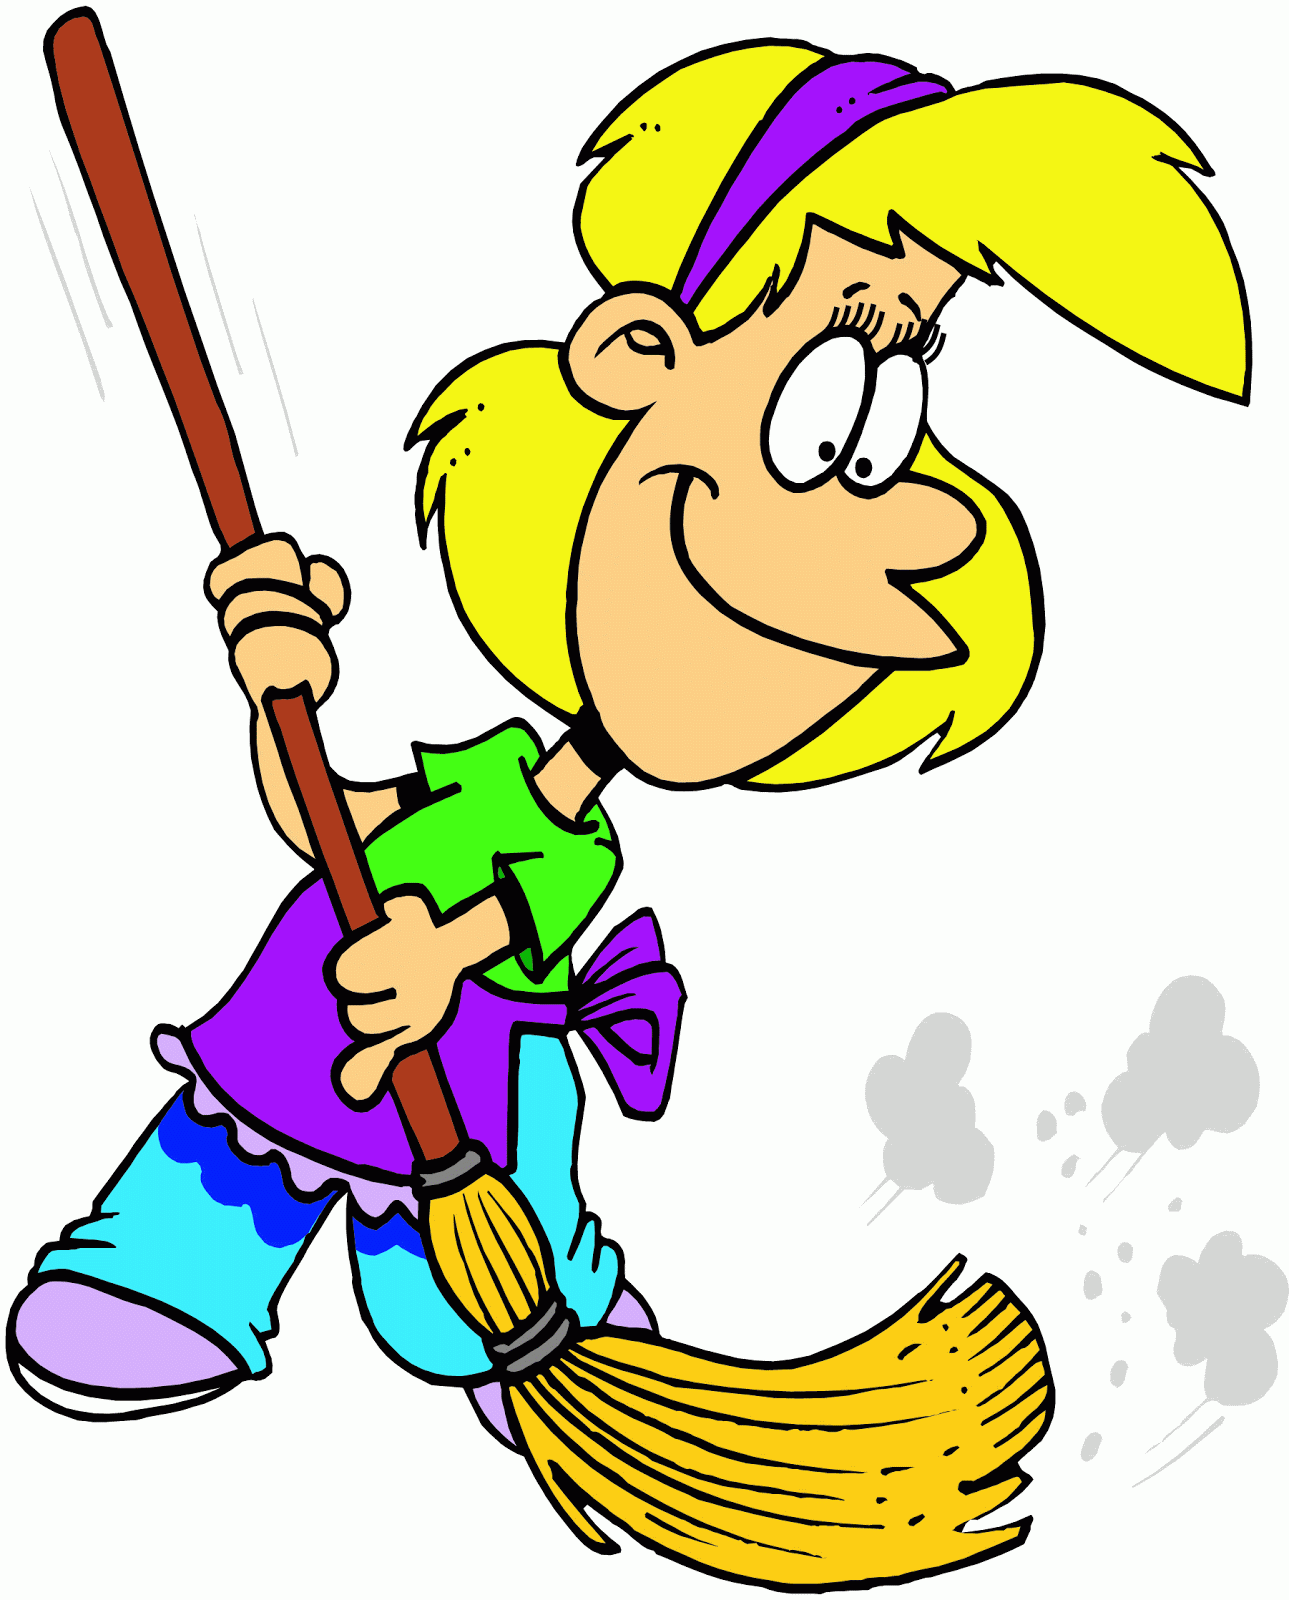 House Cleaning Cartoons - Cliparts.co